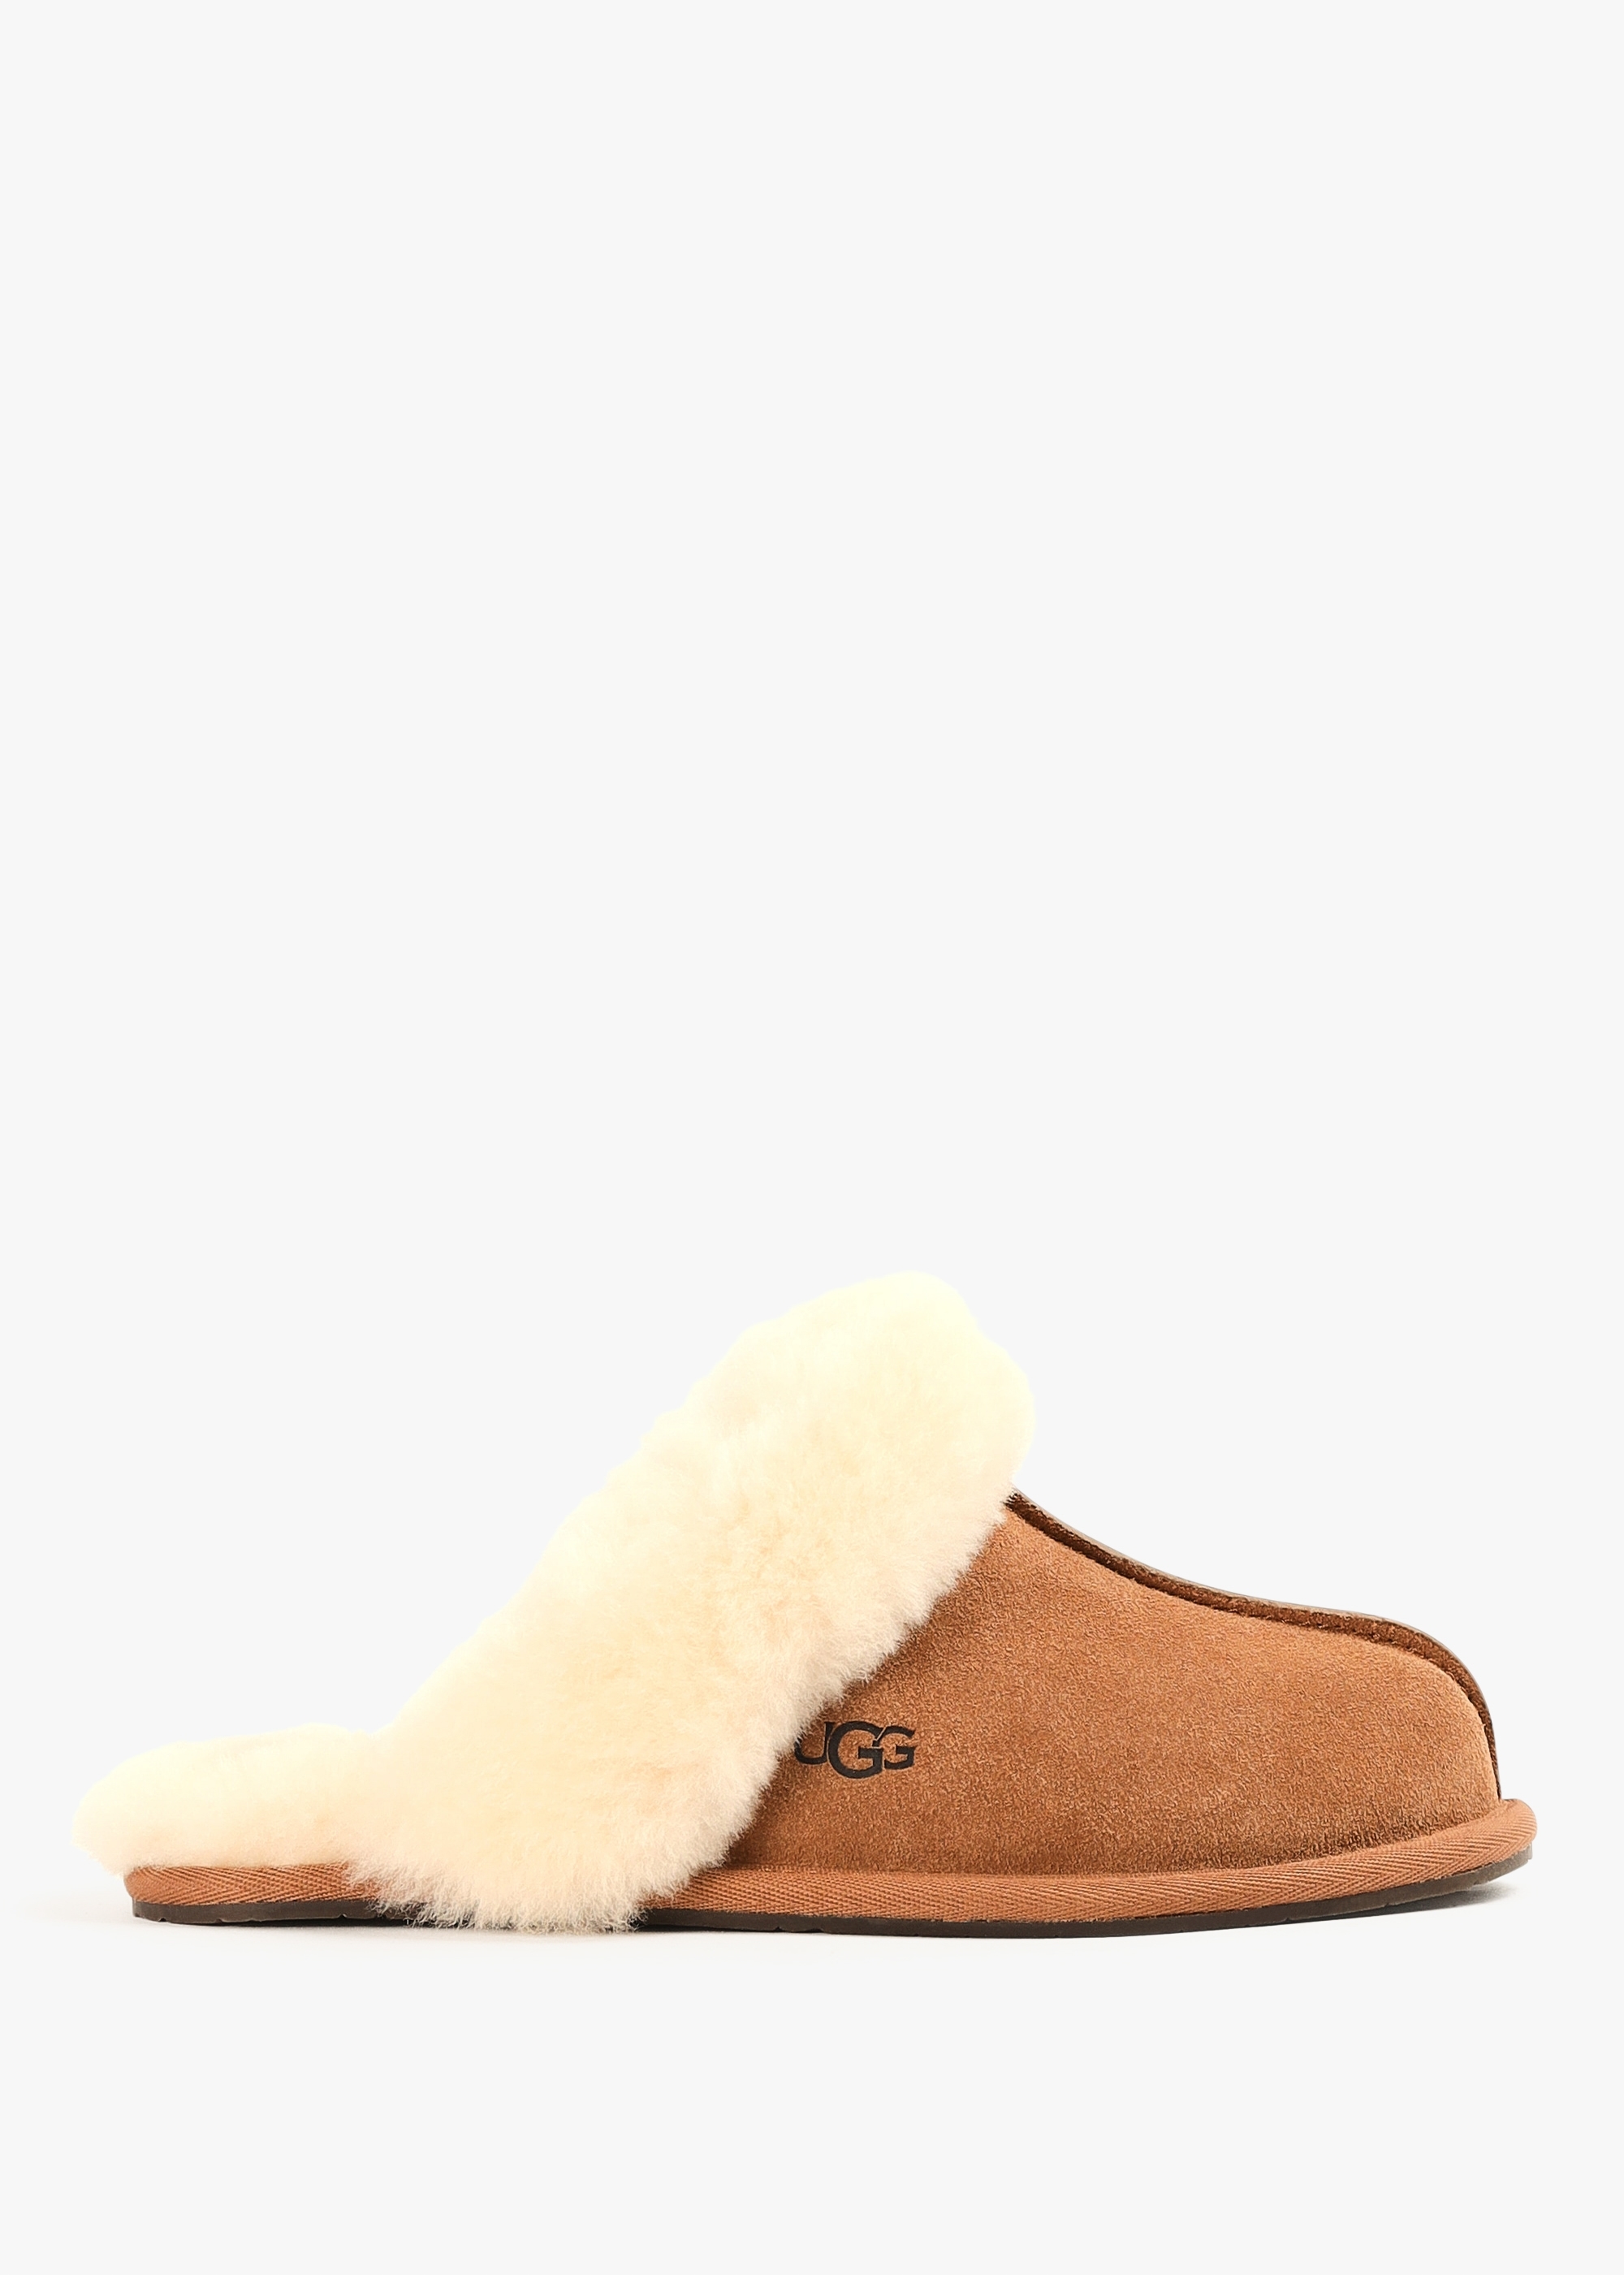 ugg-womens-scuffette-chestnut-suede-shearling-slippers